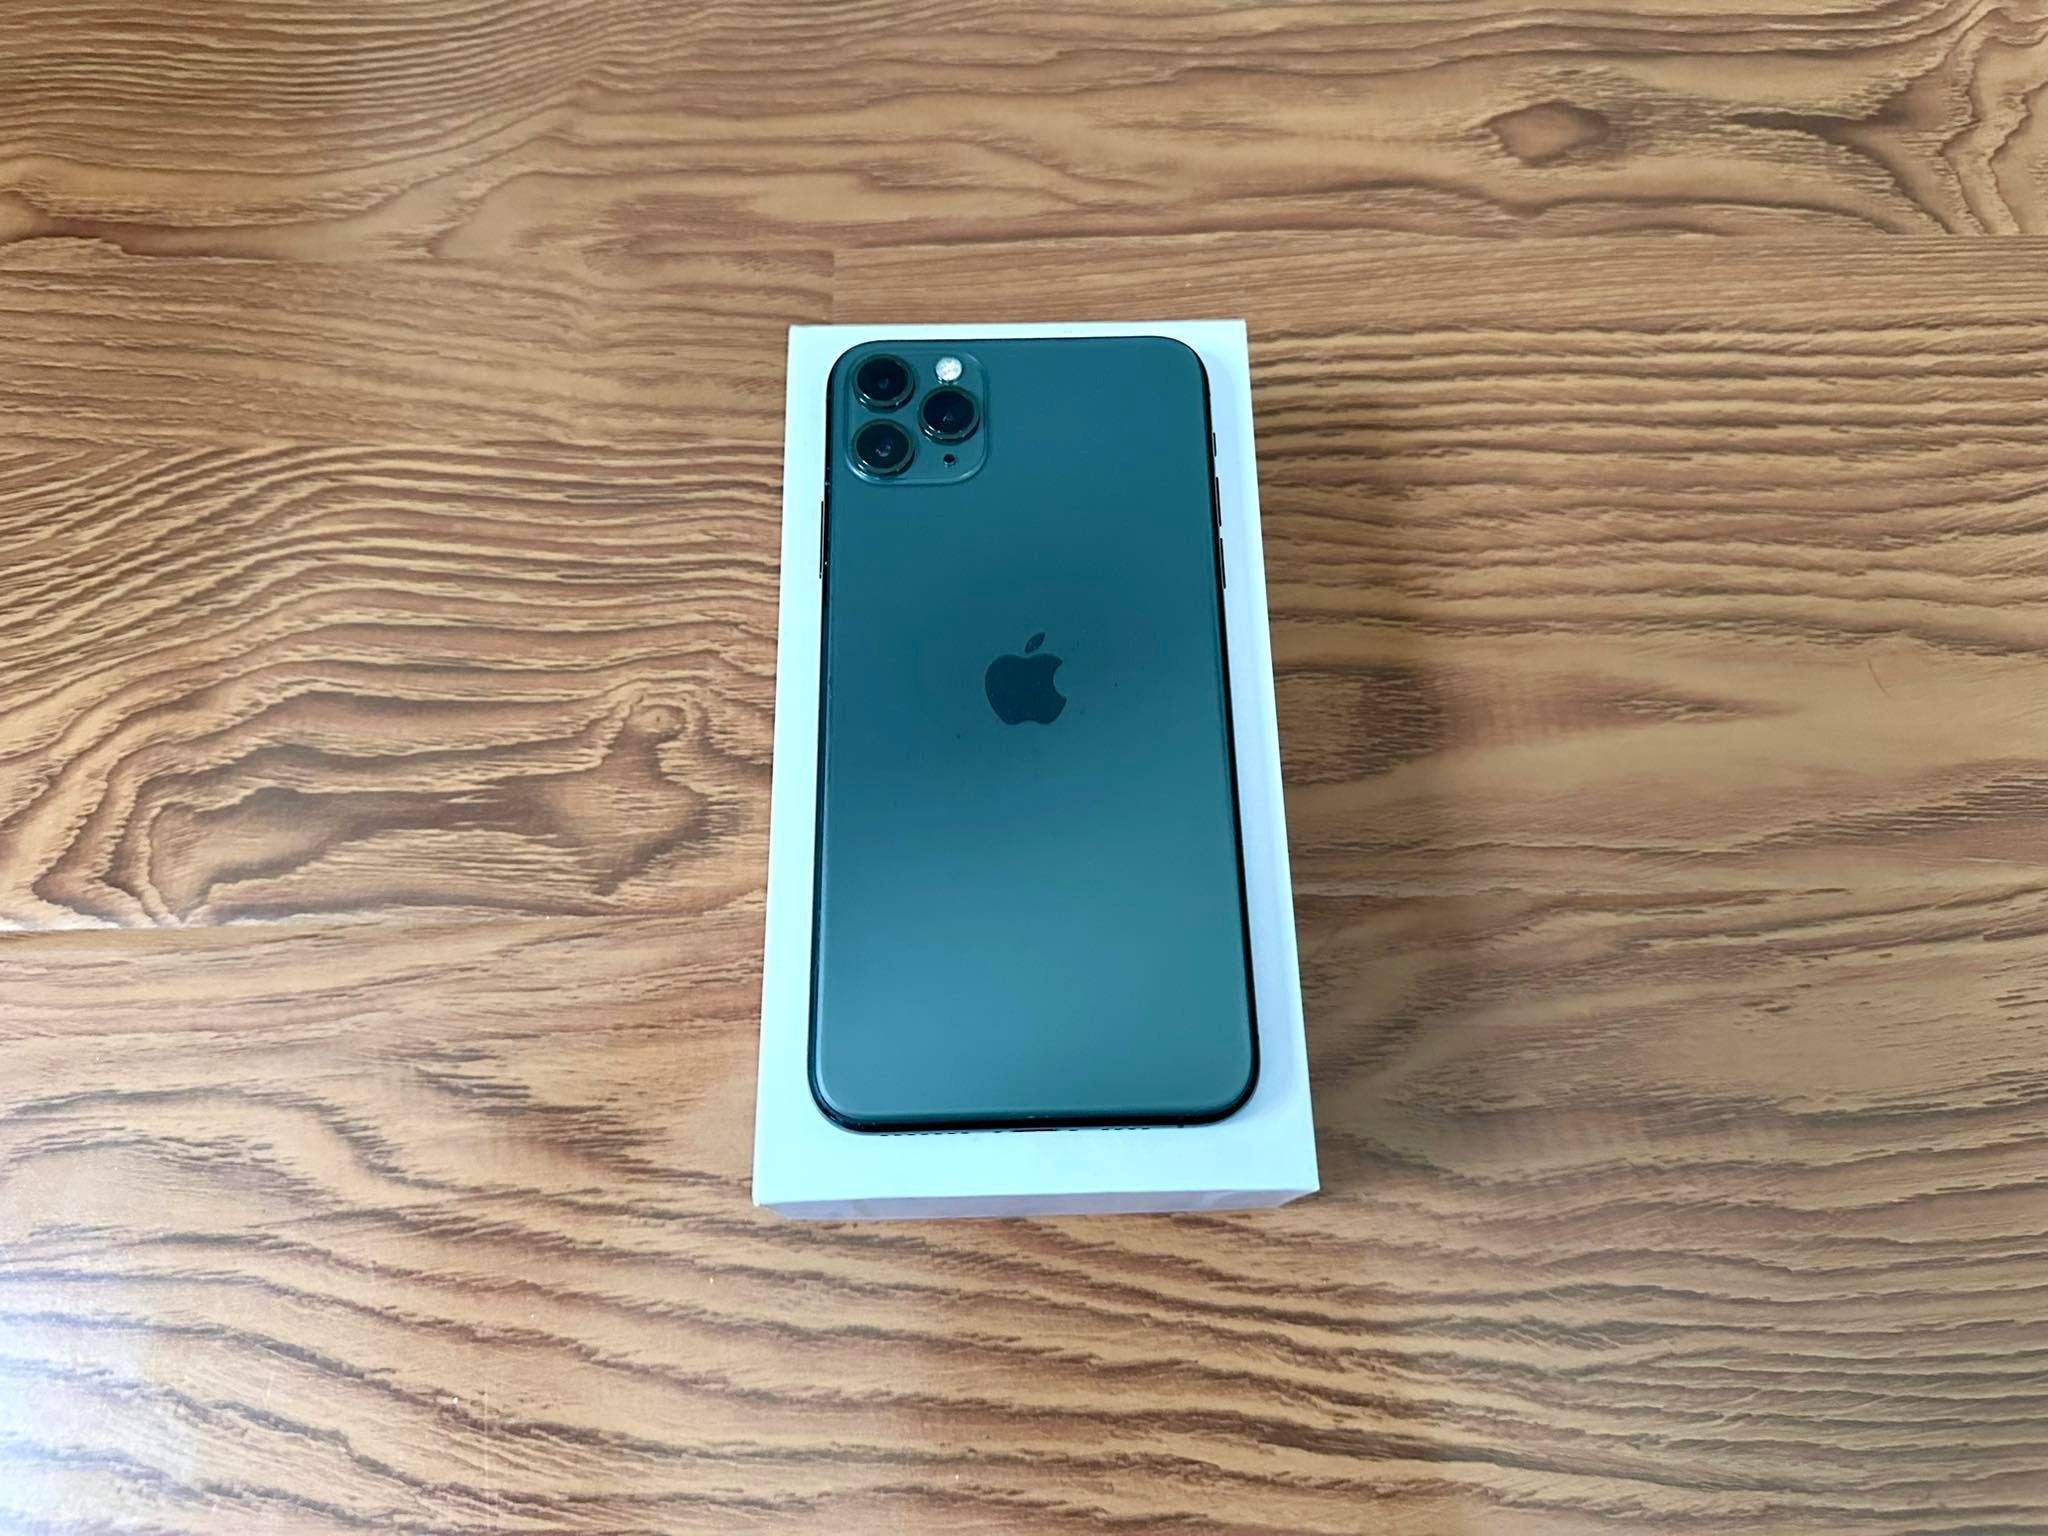 Apple iPhone 11 Pro Max 64GB Black Midnight Green  - New Battery, Case, Screen Protector & Shipping (Like New / Battery Msg)